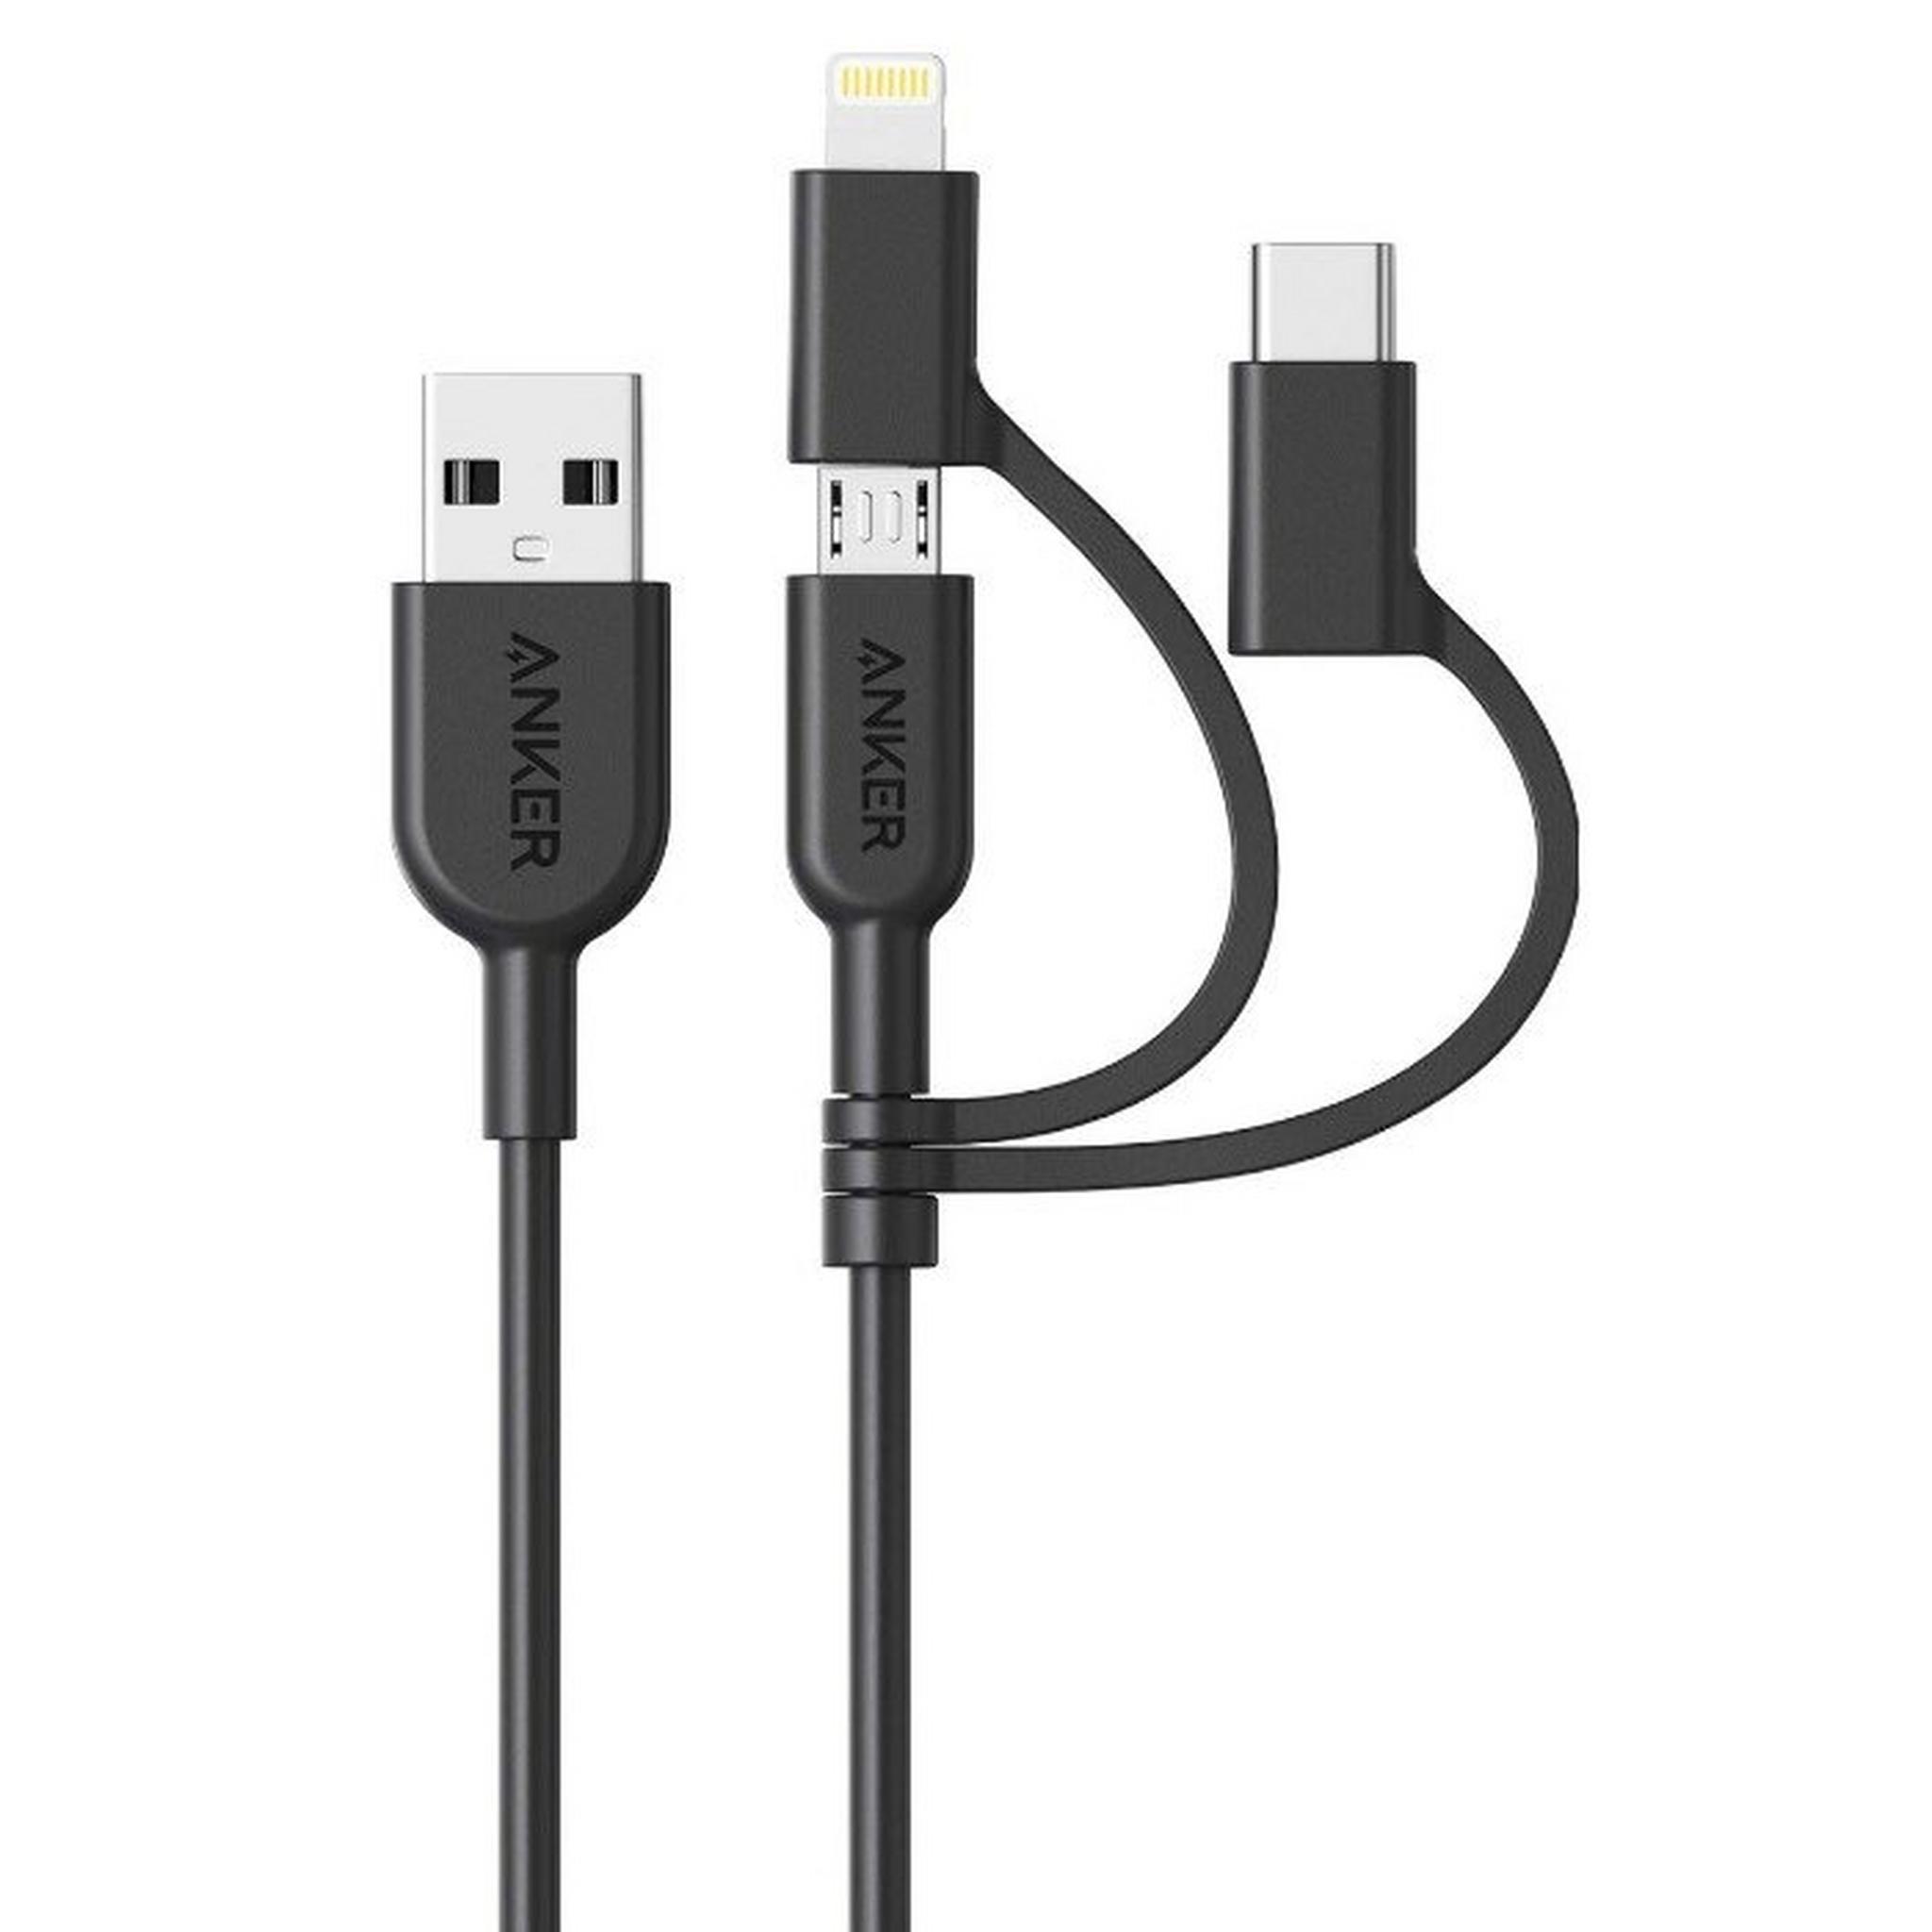 Anker PowerLine II 3 in 1 3ft Cable, Micro USB, USB-C And Lightning Connectors - Black